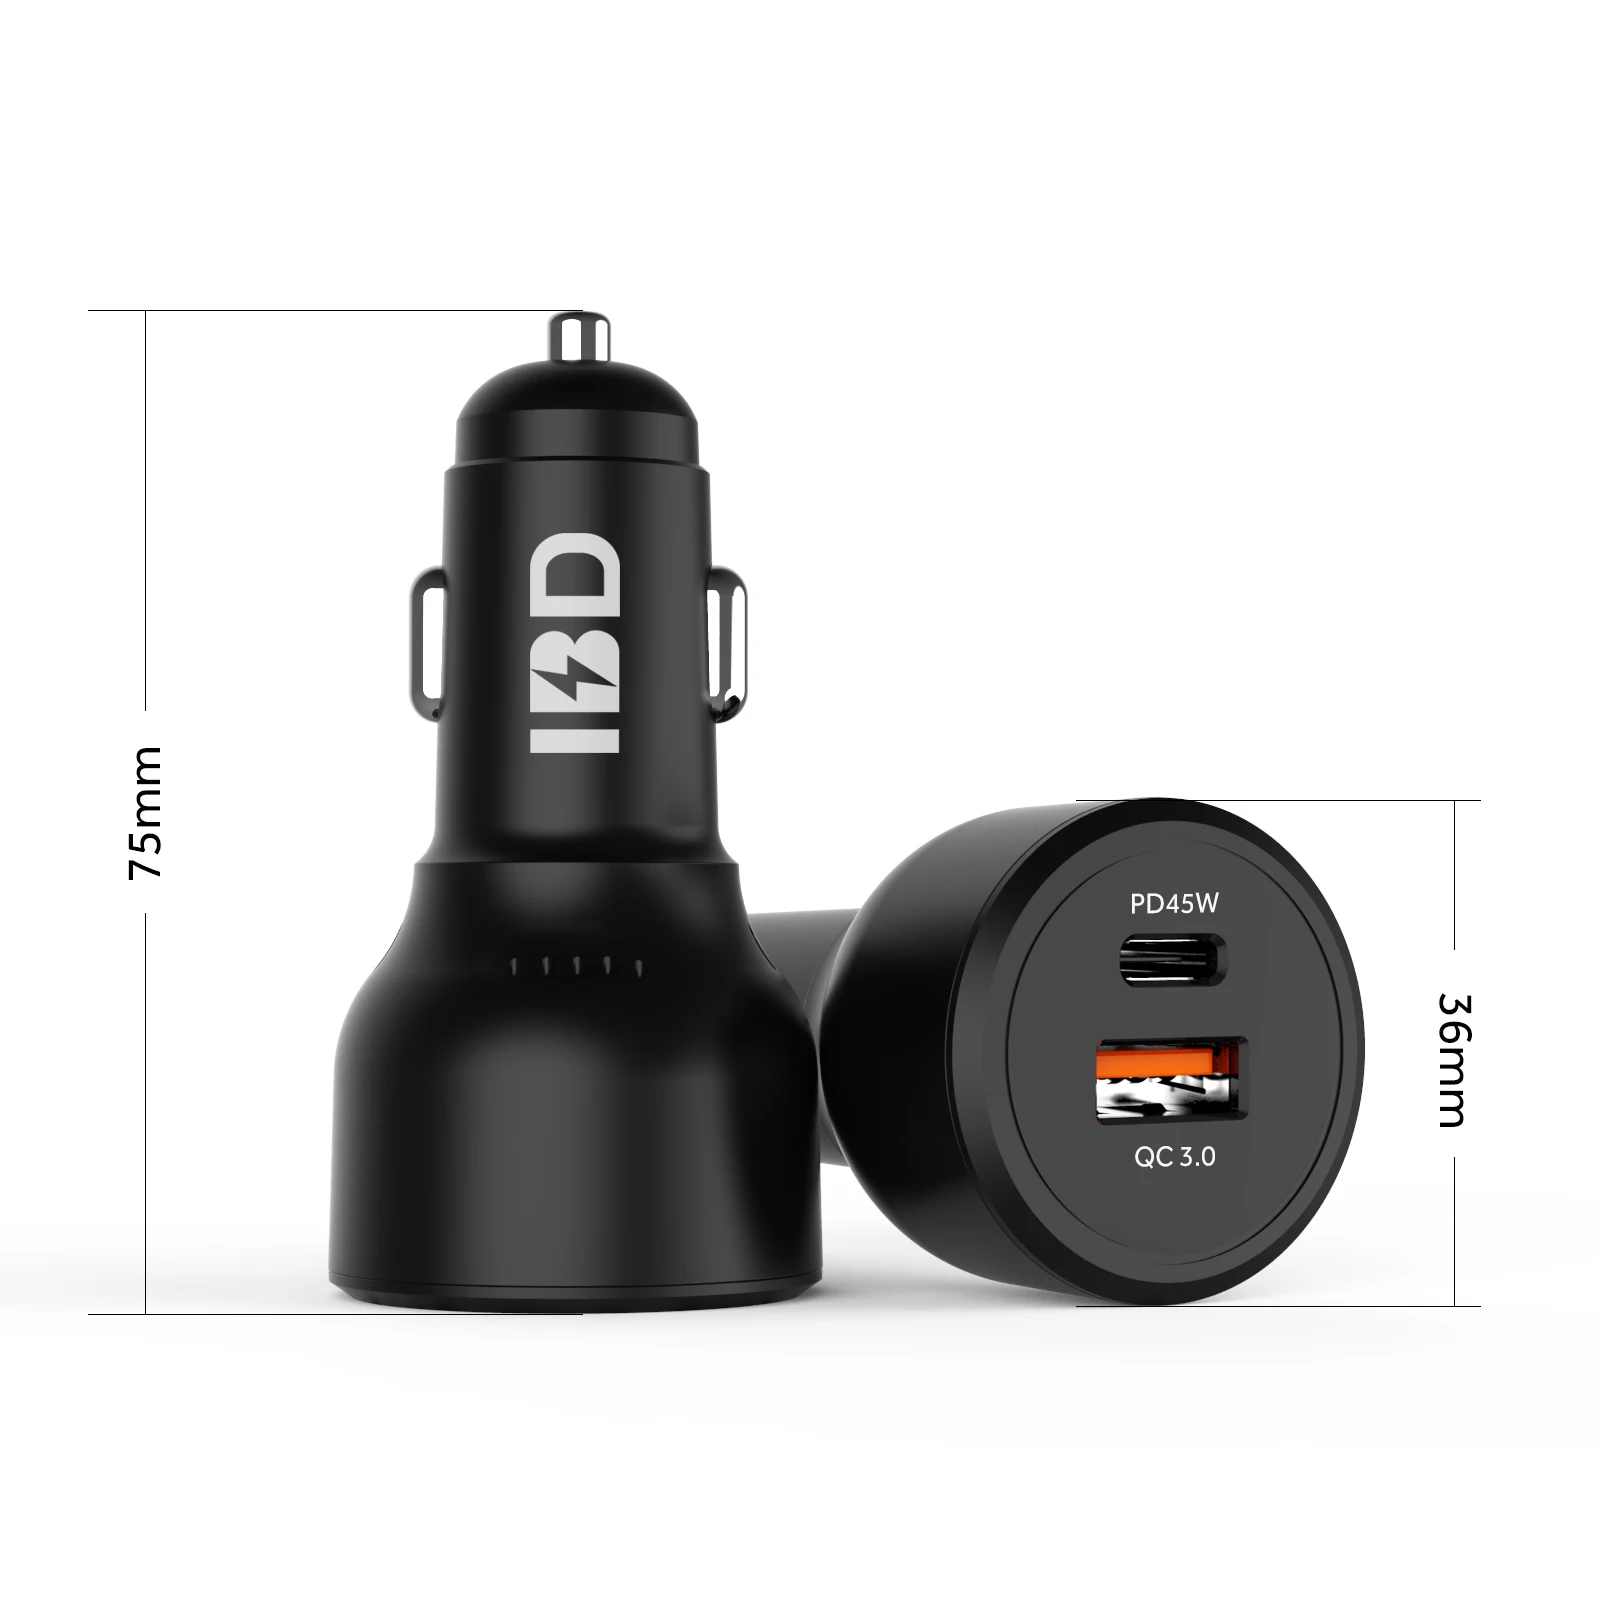 

Electric pd 45w qc3.0 two ports type-c car charger dual port car laptop charger for sale, Black oem